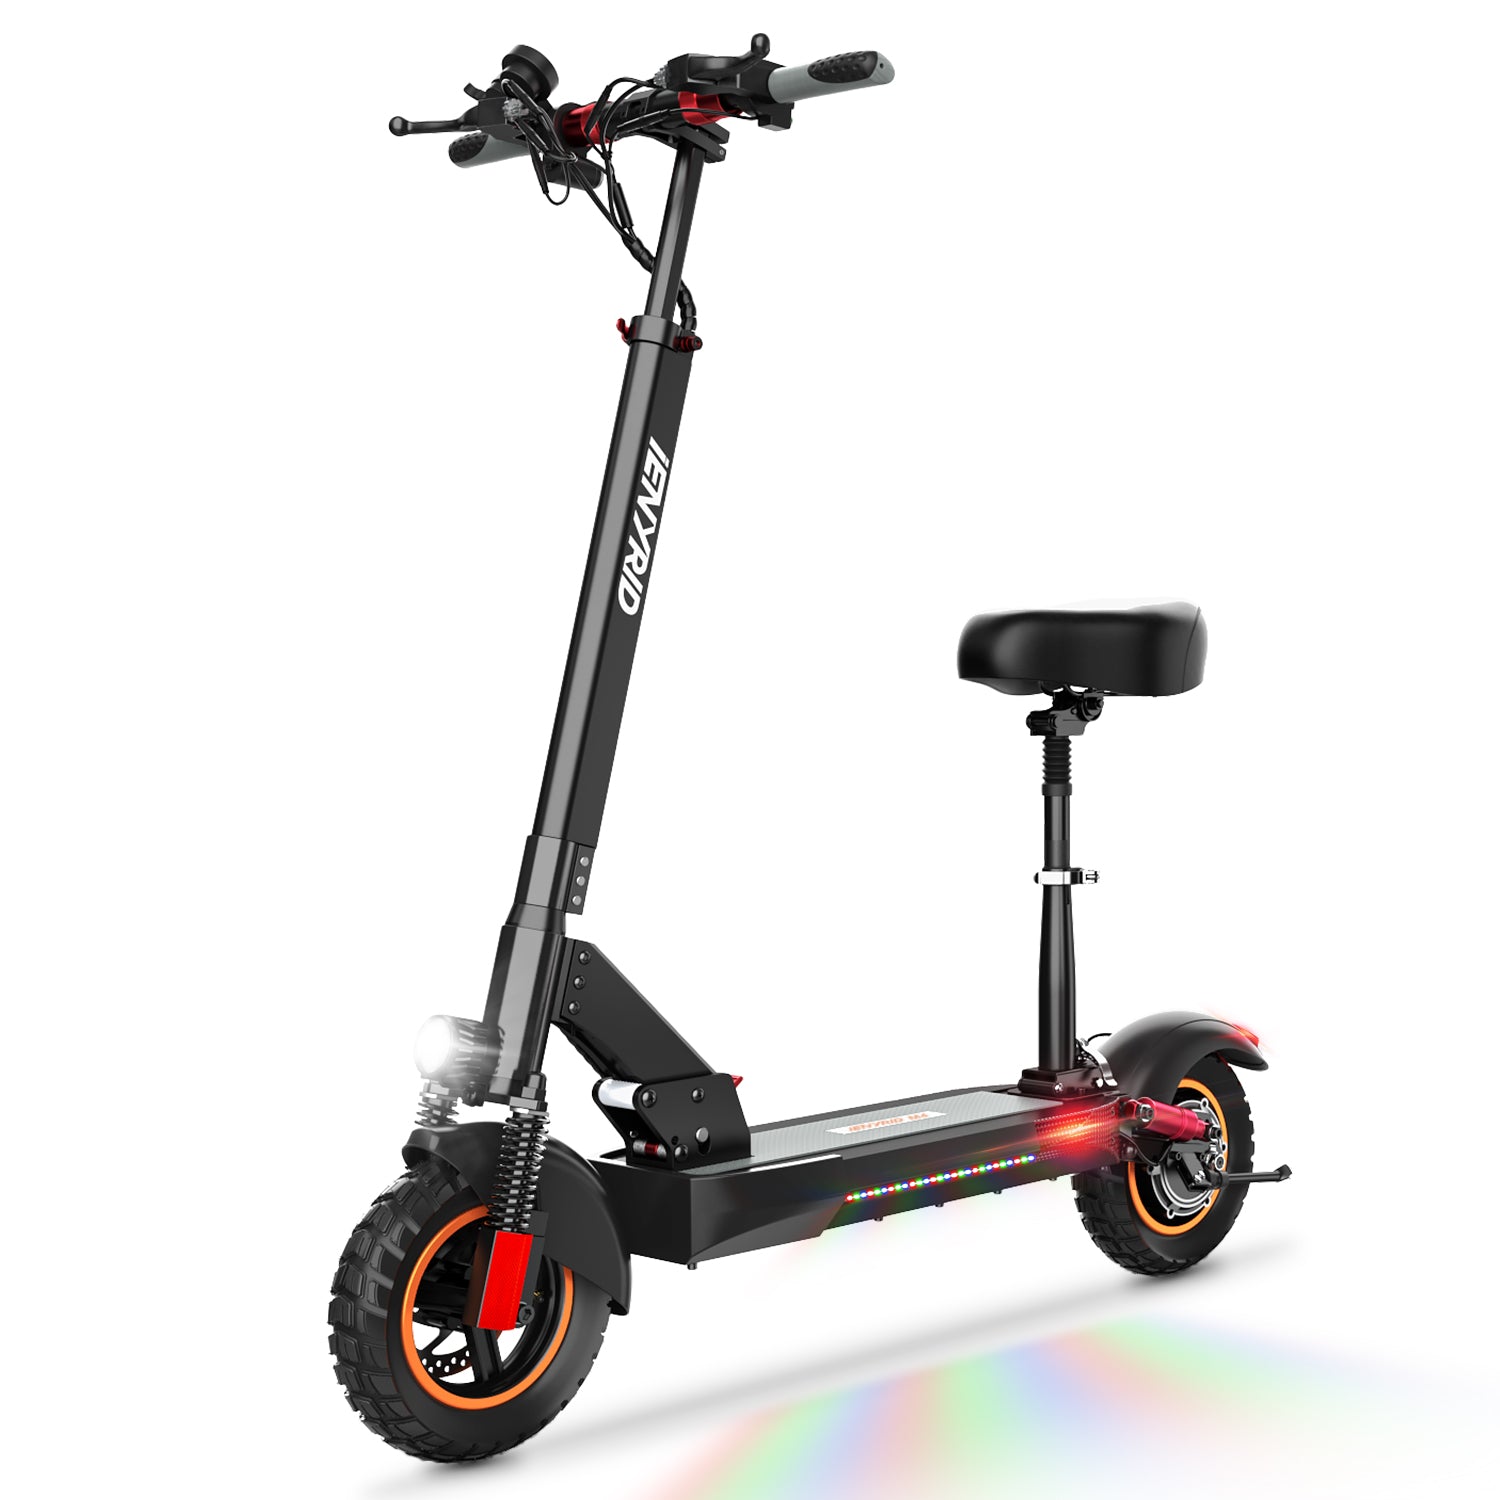 IENYRID M4 600W Motor 10 Inch Off-road Electric Scooter 10Ah Battery